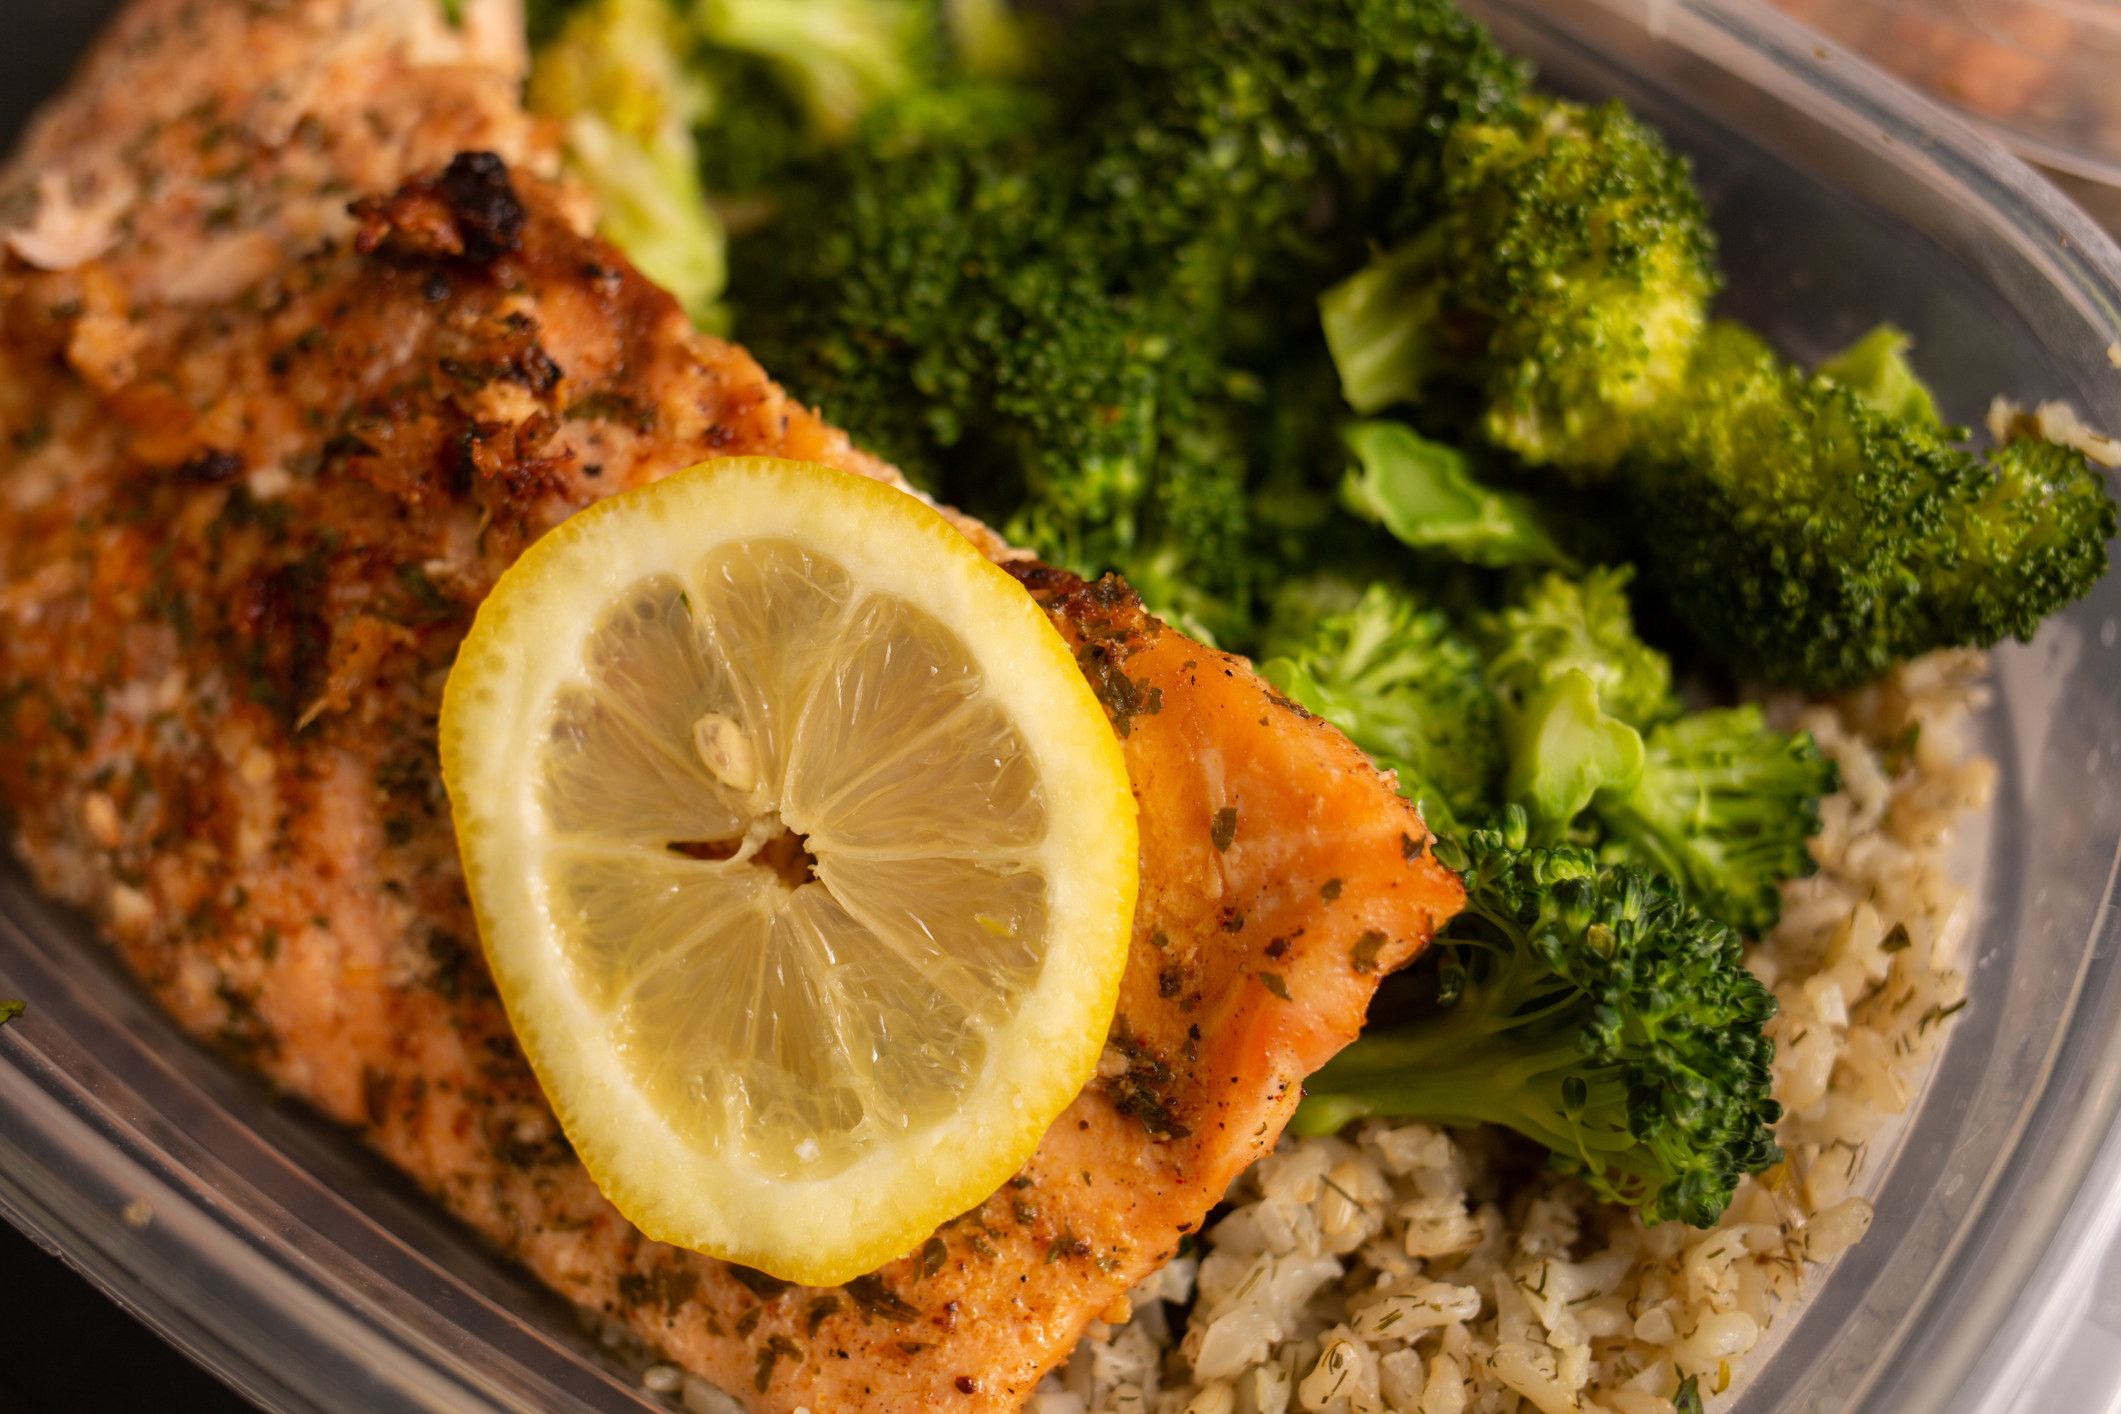 Salmon with broccoli and rice.